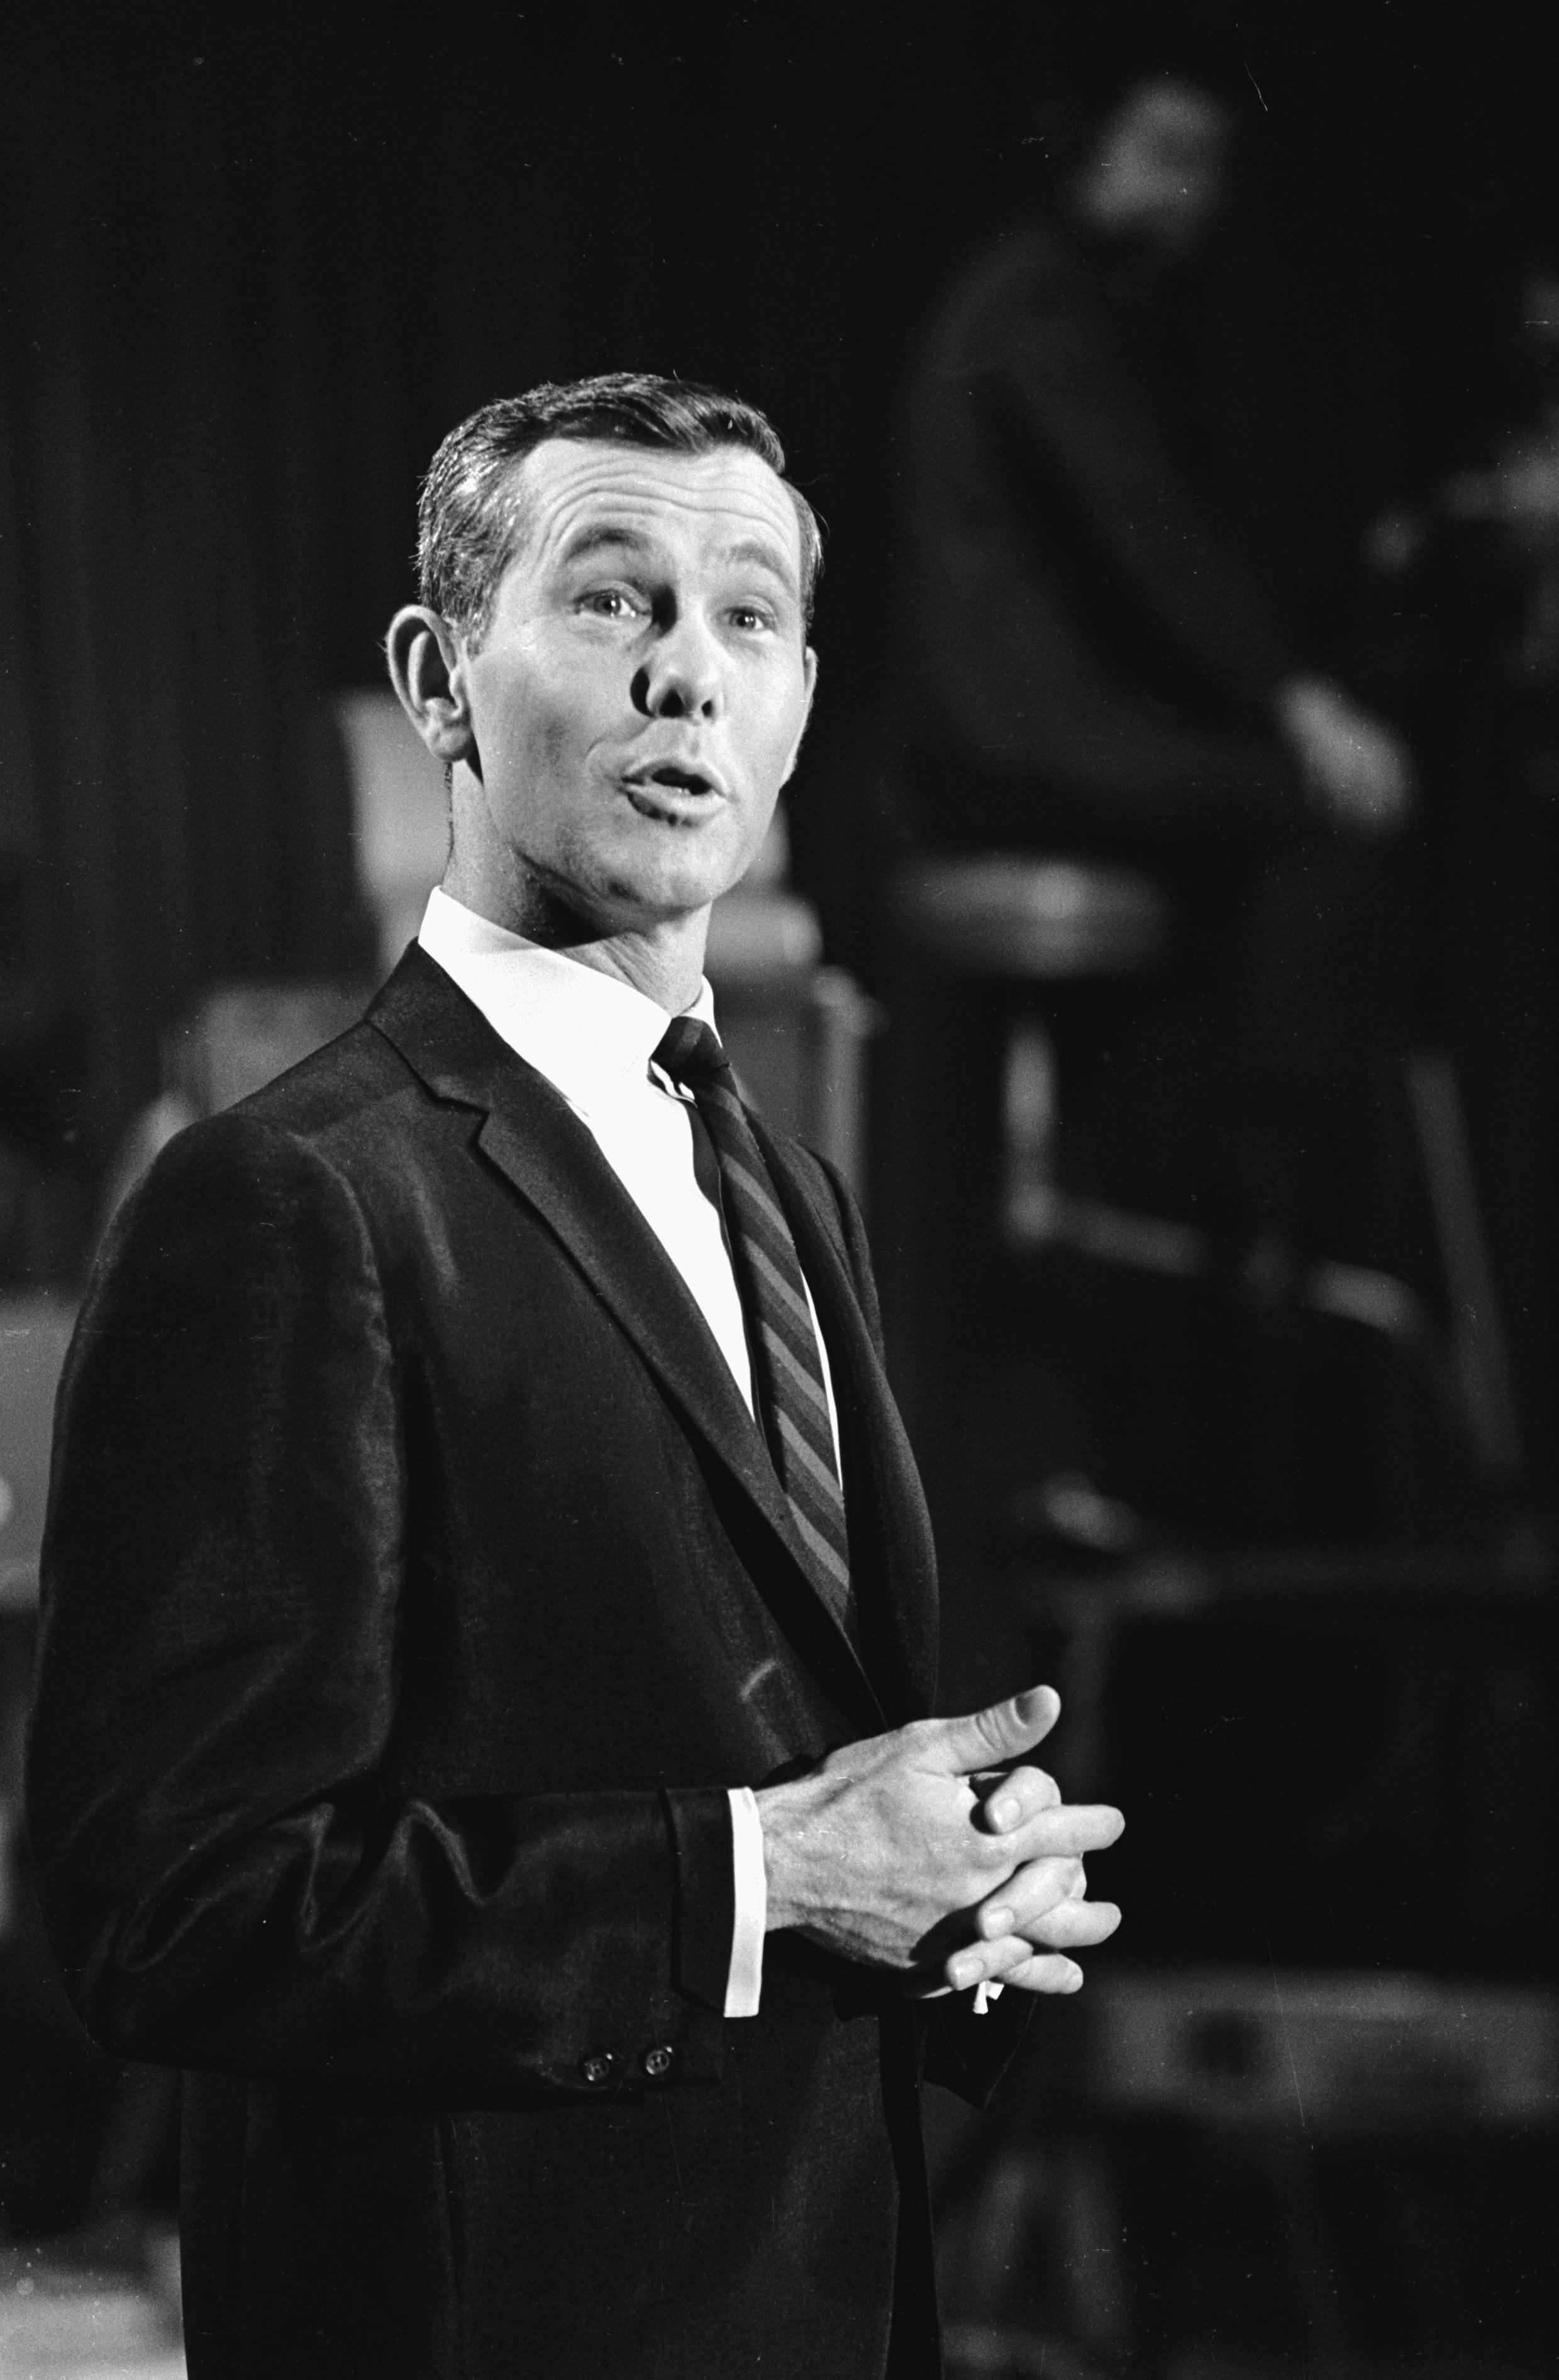 Johnny Carson, star of NBC's 'Tonight' show, December 1964 | Photo: GettyImages